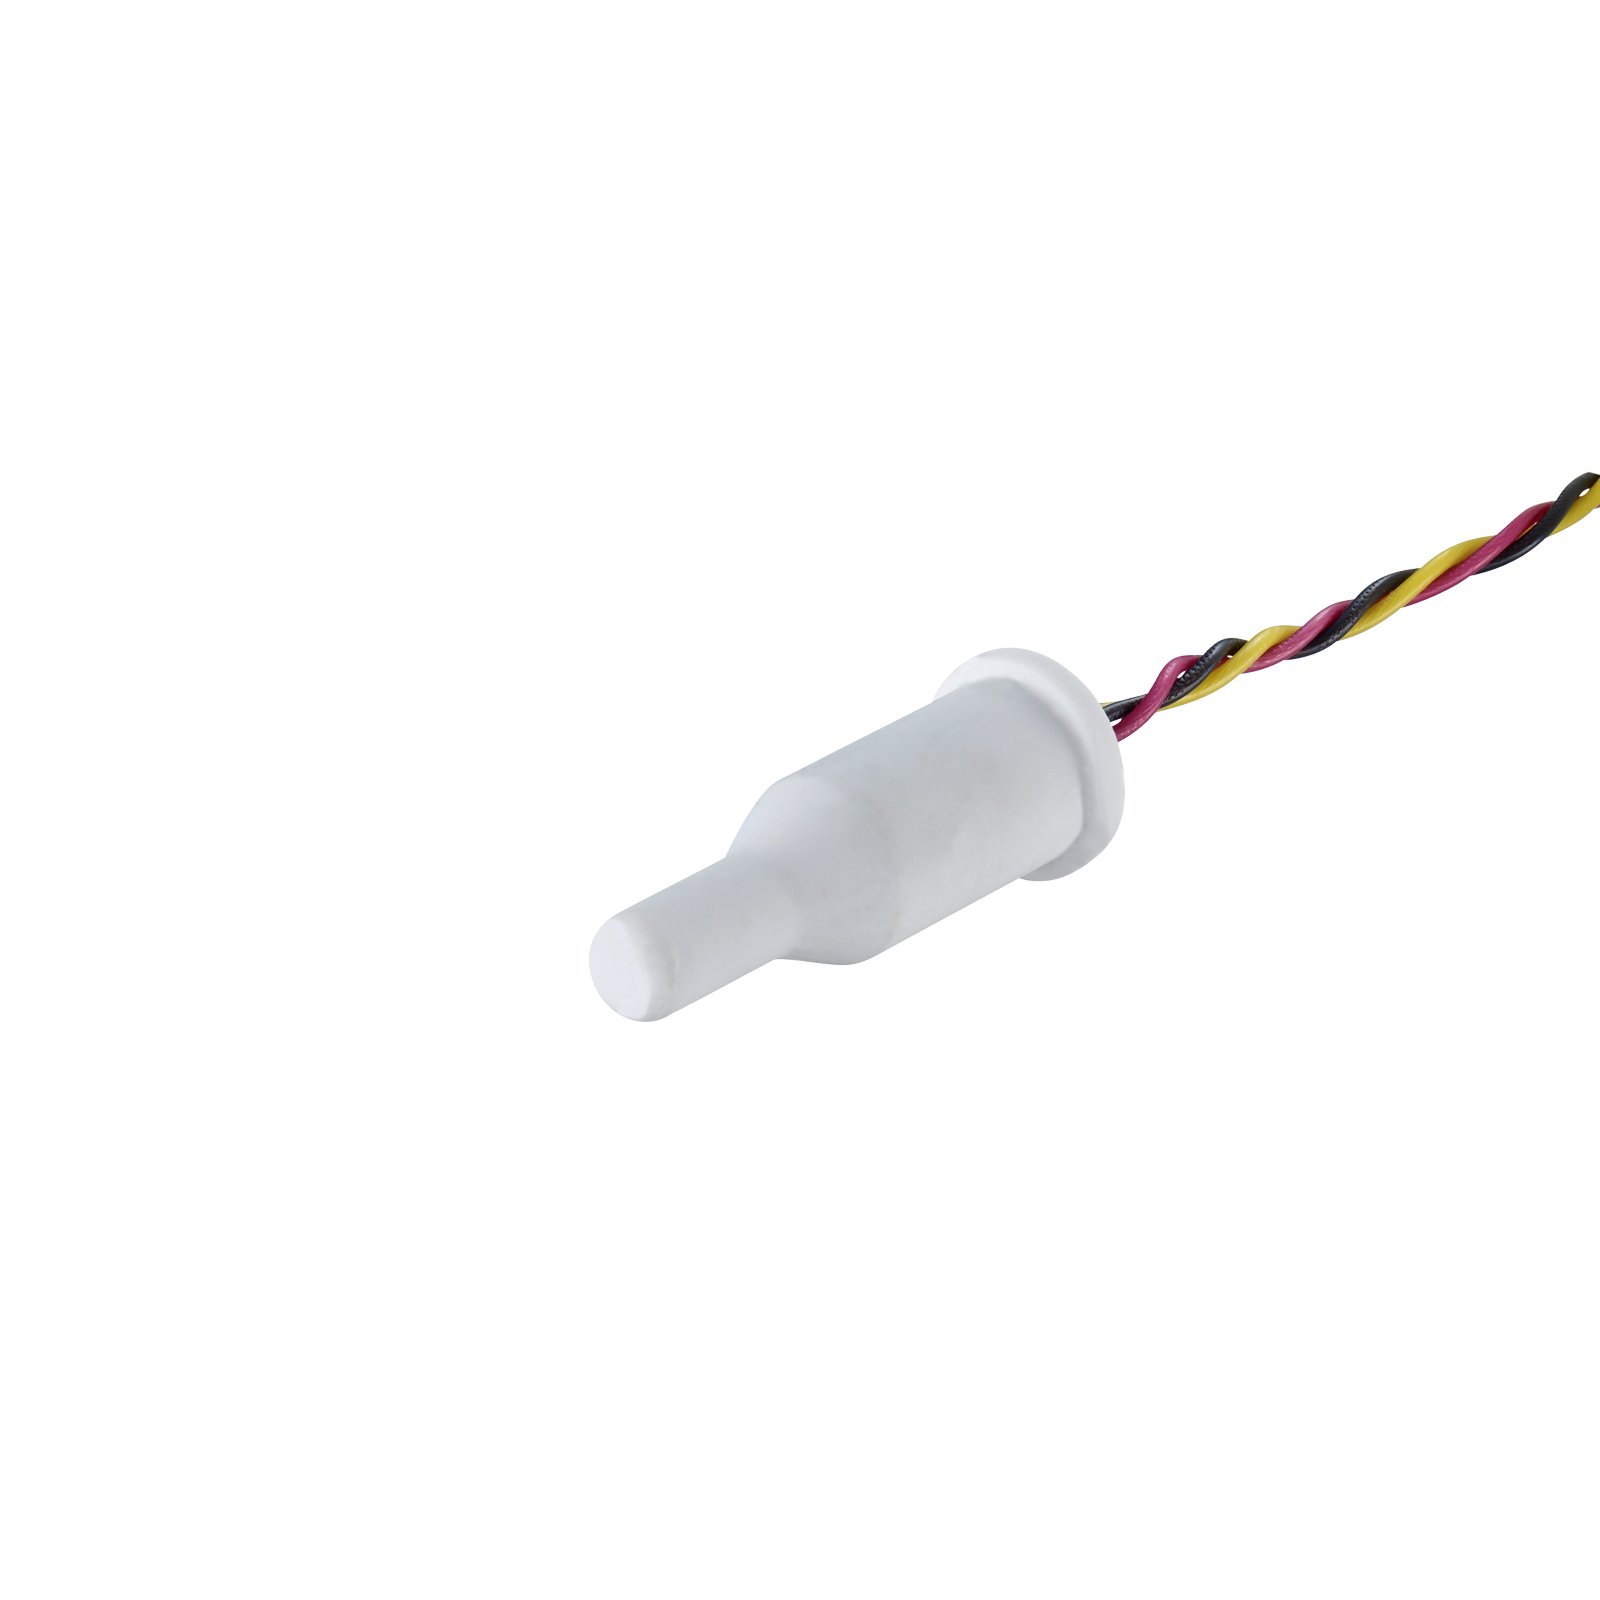 Instantaneous water heater probes; temperature probes for instantaneous water heaters